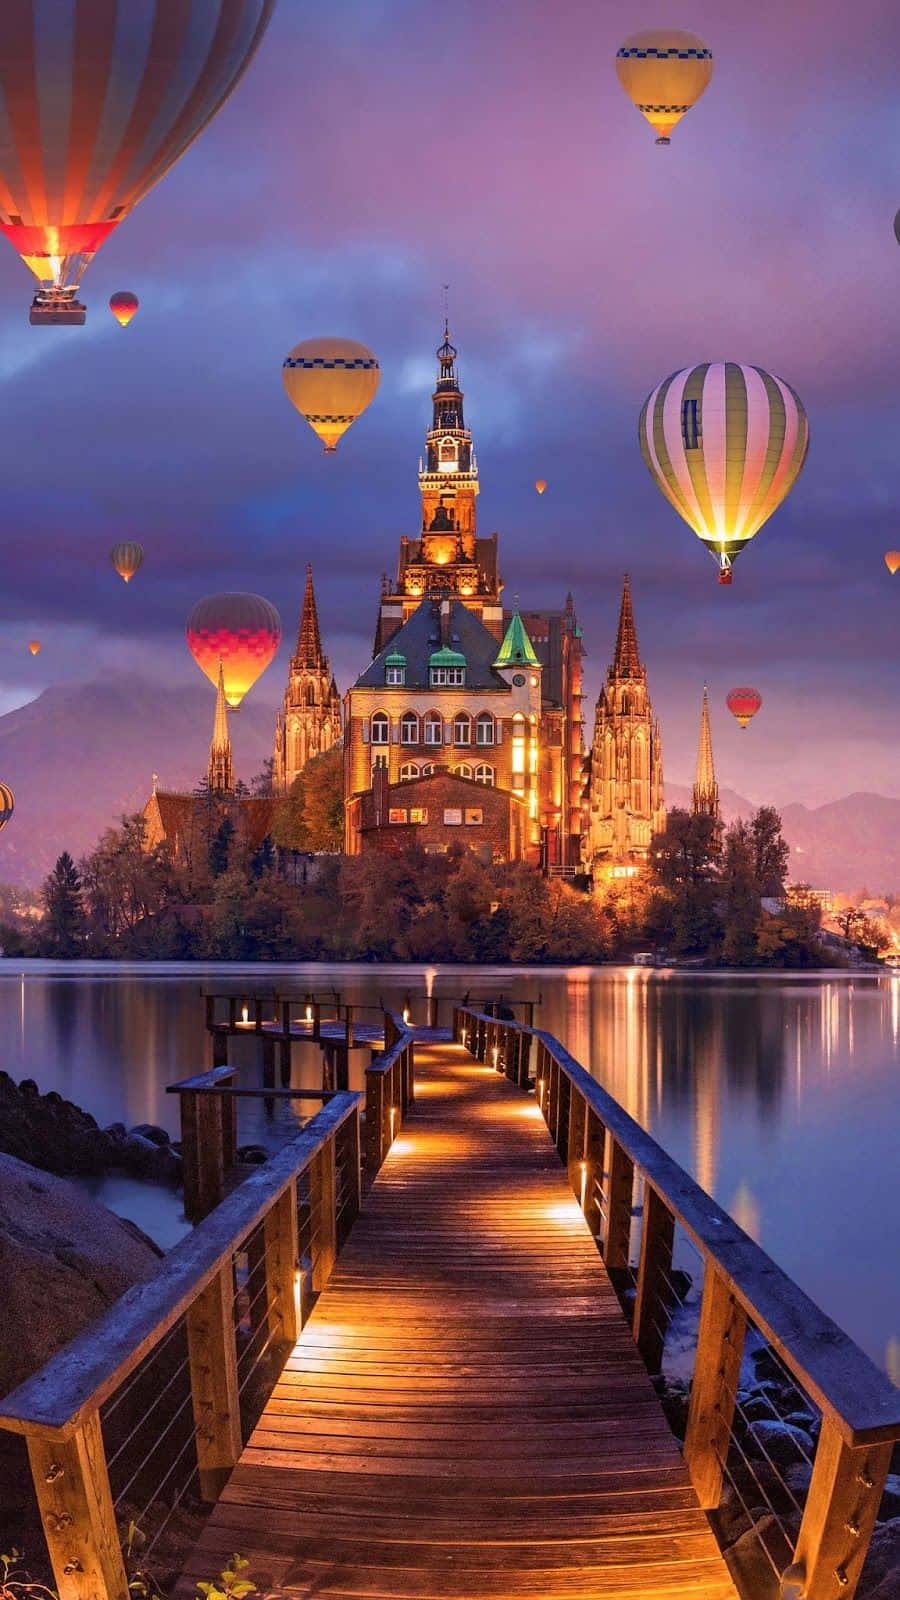 Hot Air Balloons Flying Over A Bridge And Castle